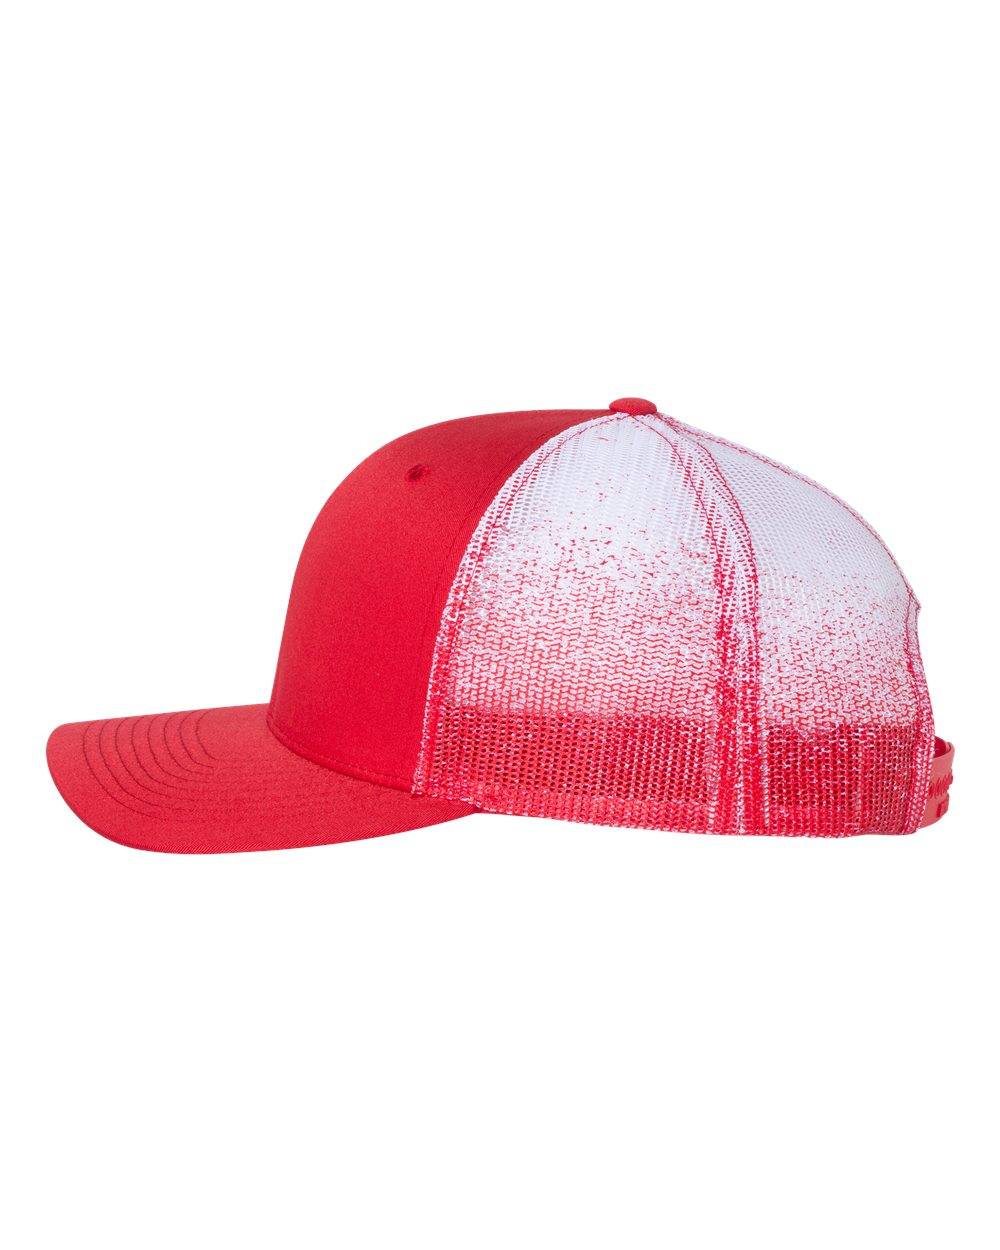 Chicago Bulls 3D Patterned Mesh Snapback Trucker Hat- Red/ Red to White Fade - Ten Gallon Hat Co.